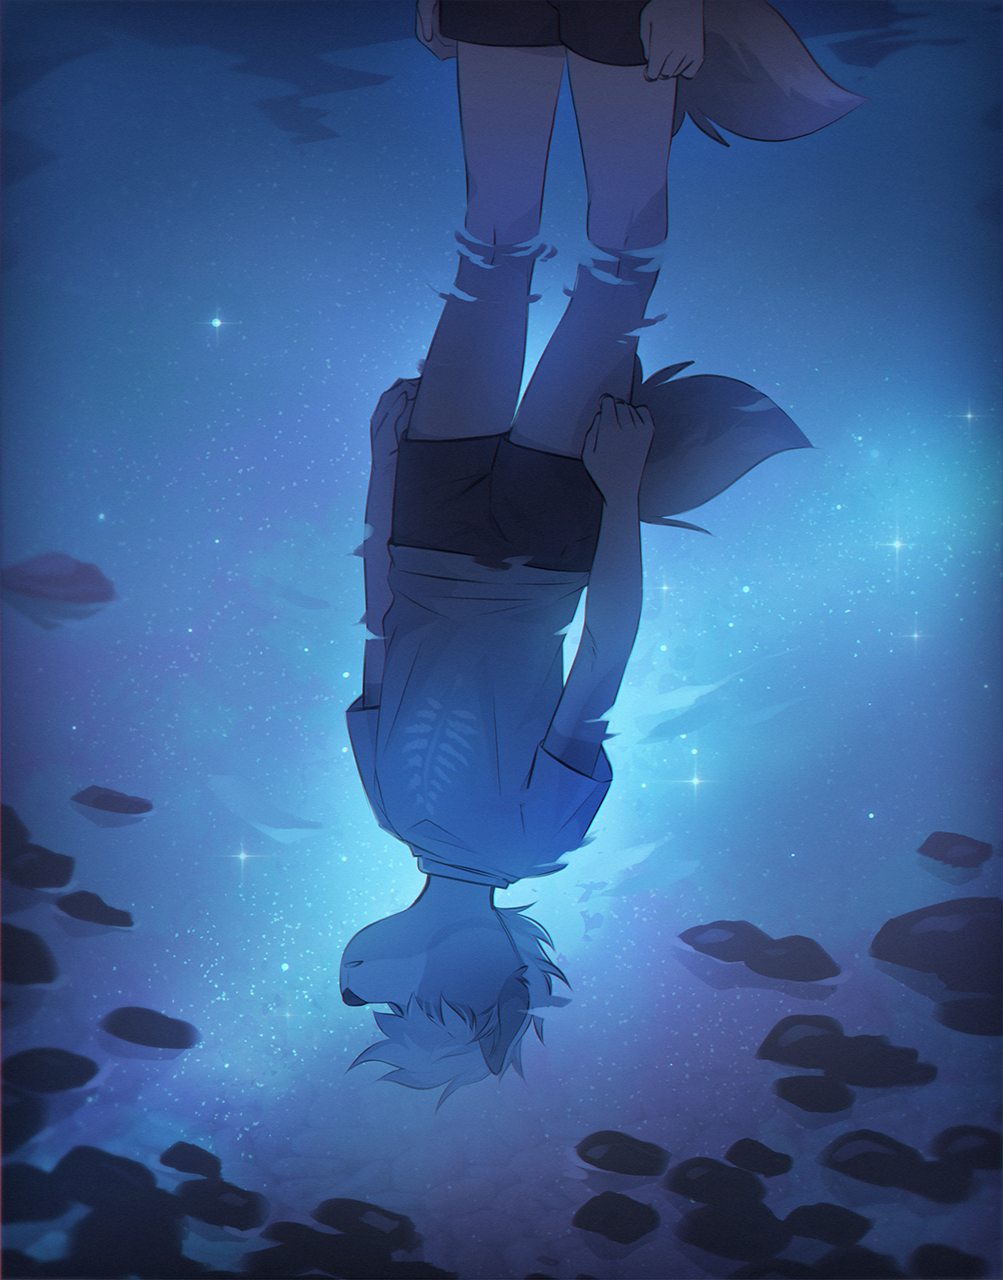 Night Sky - Furry, Furry art, Night, Starry sky, Reflection in a puddle, Reflection, Fumiko